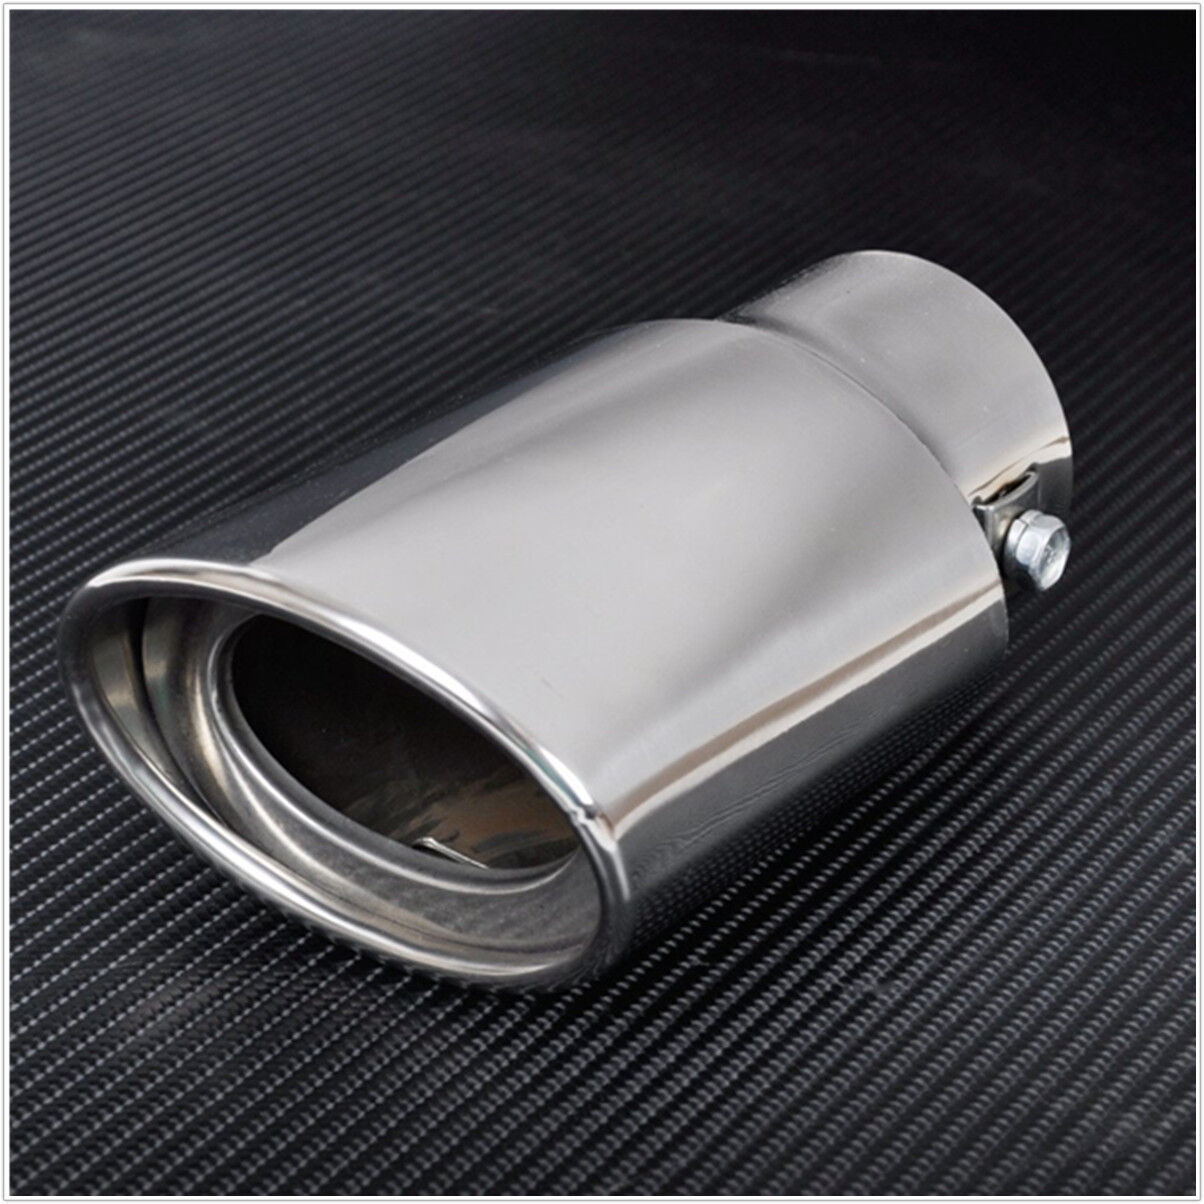 Universal Chrome Stainless Steel Car Rear Round Exhaust Pipe Tail Muffler Tip